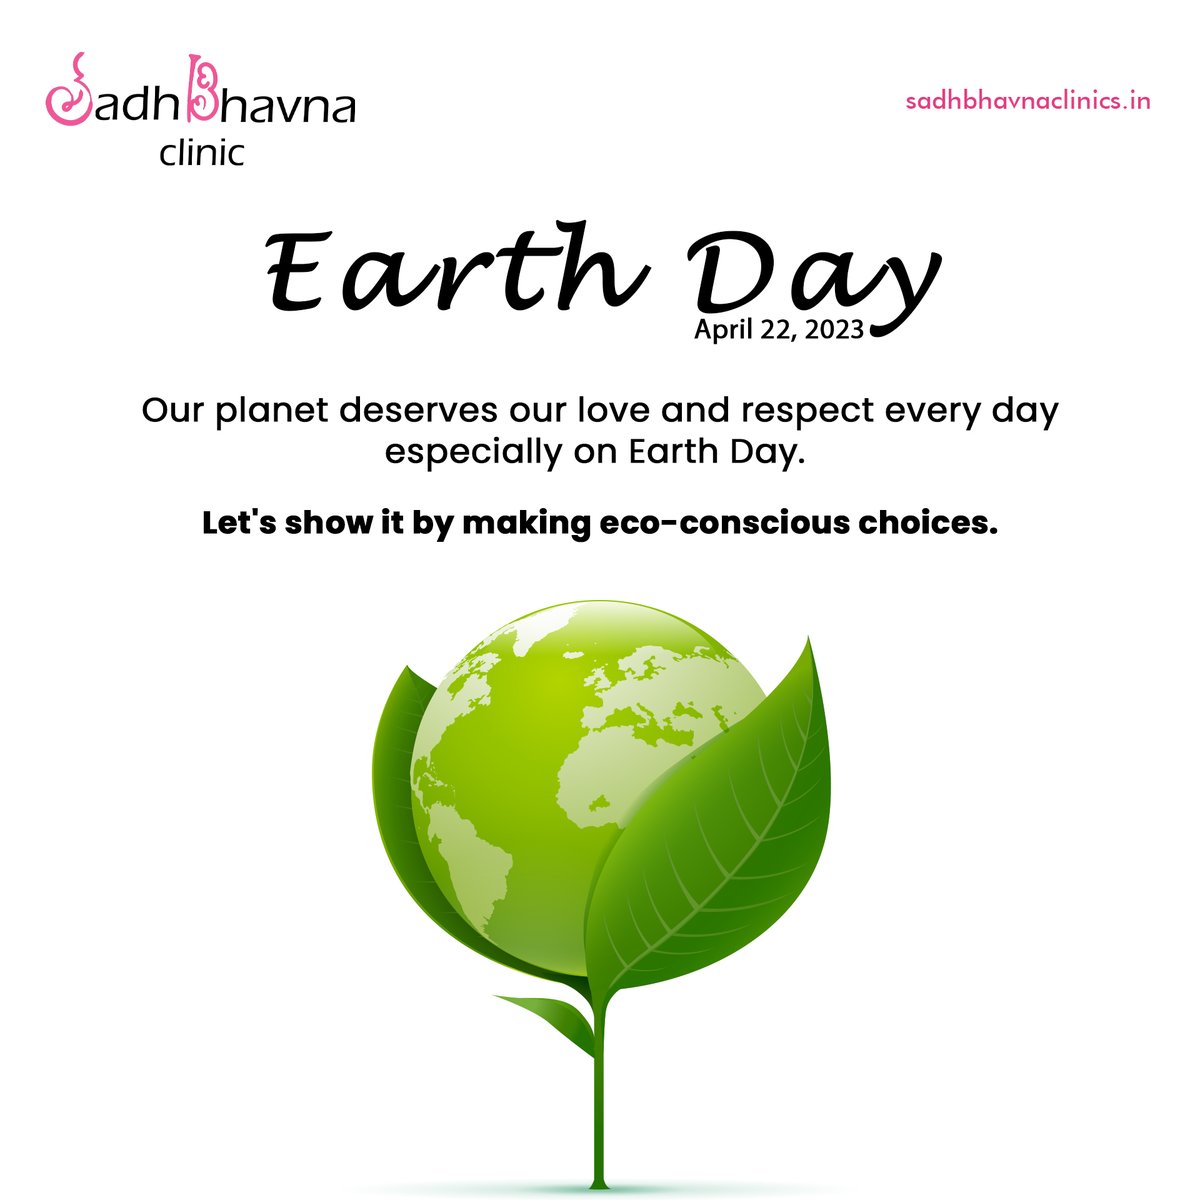 🌍🌿 Happy World Earth Day🌿🌍 Let's come together to protect our planet and create a sustainable future for all💚

#EarthDay #NatureIsMagic #SadhbhavnaClinic #DrBhawnaAgarwal #Gynaecologist #IVFSpecialist #HealthyDelivery #IVF #Gynaecology #WomensHealth #DigitalSeriesAgency